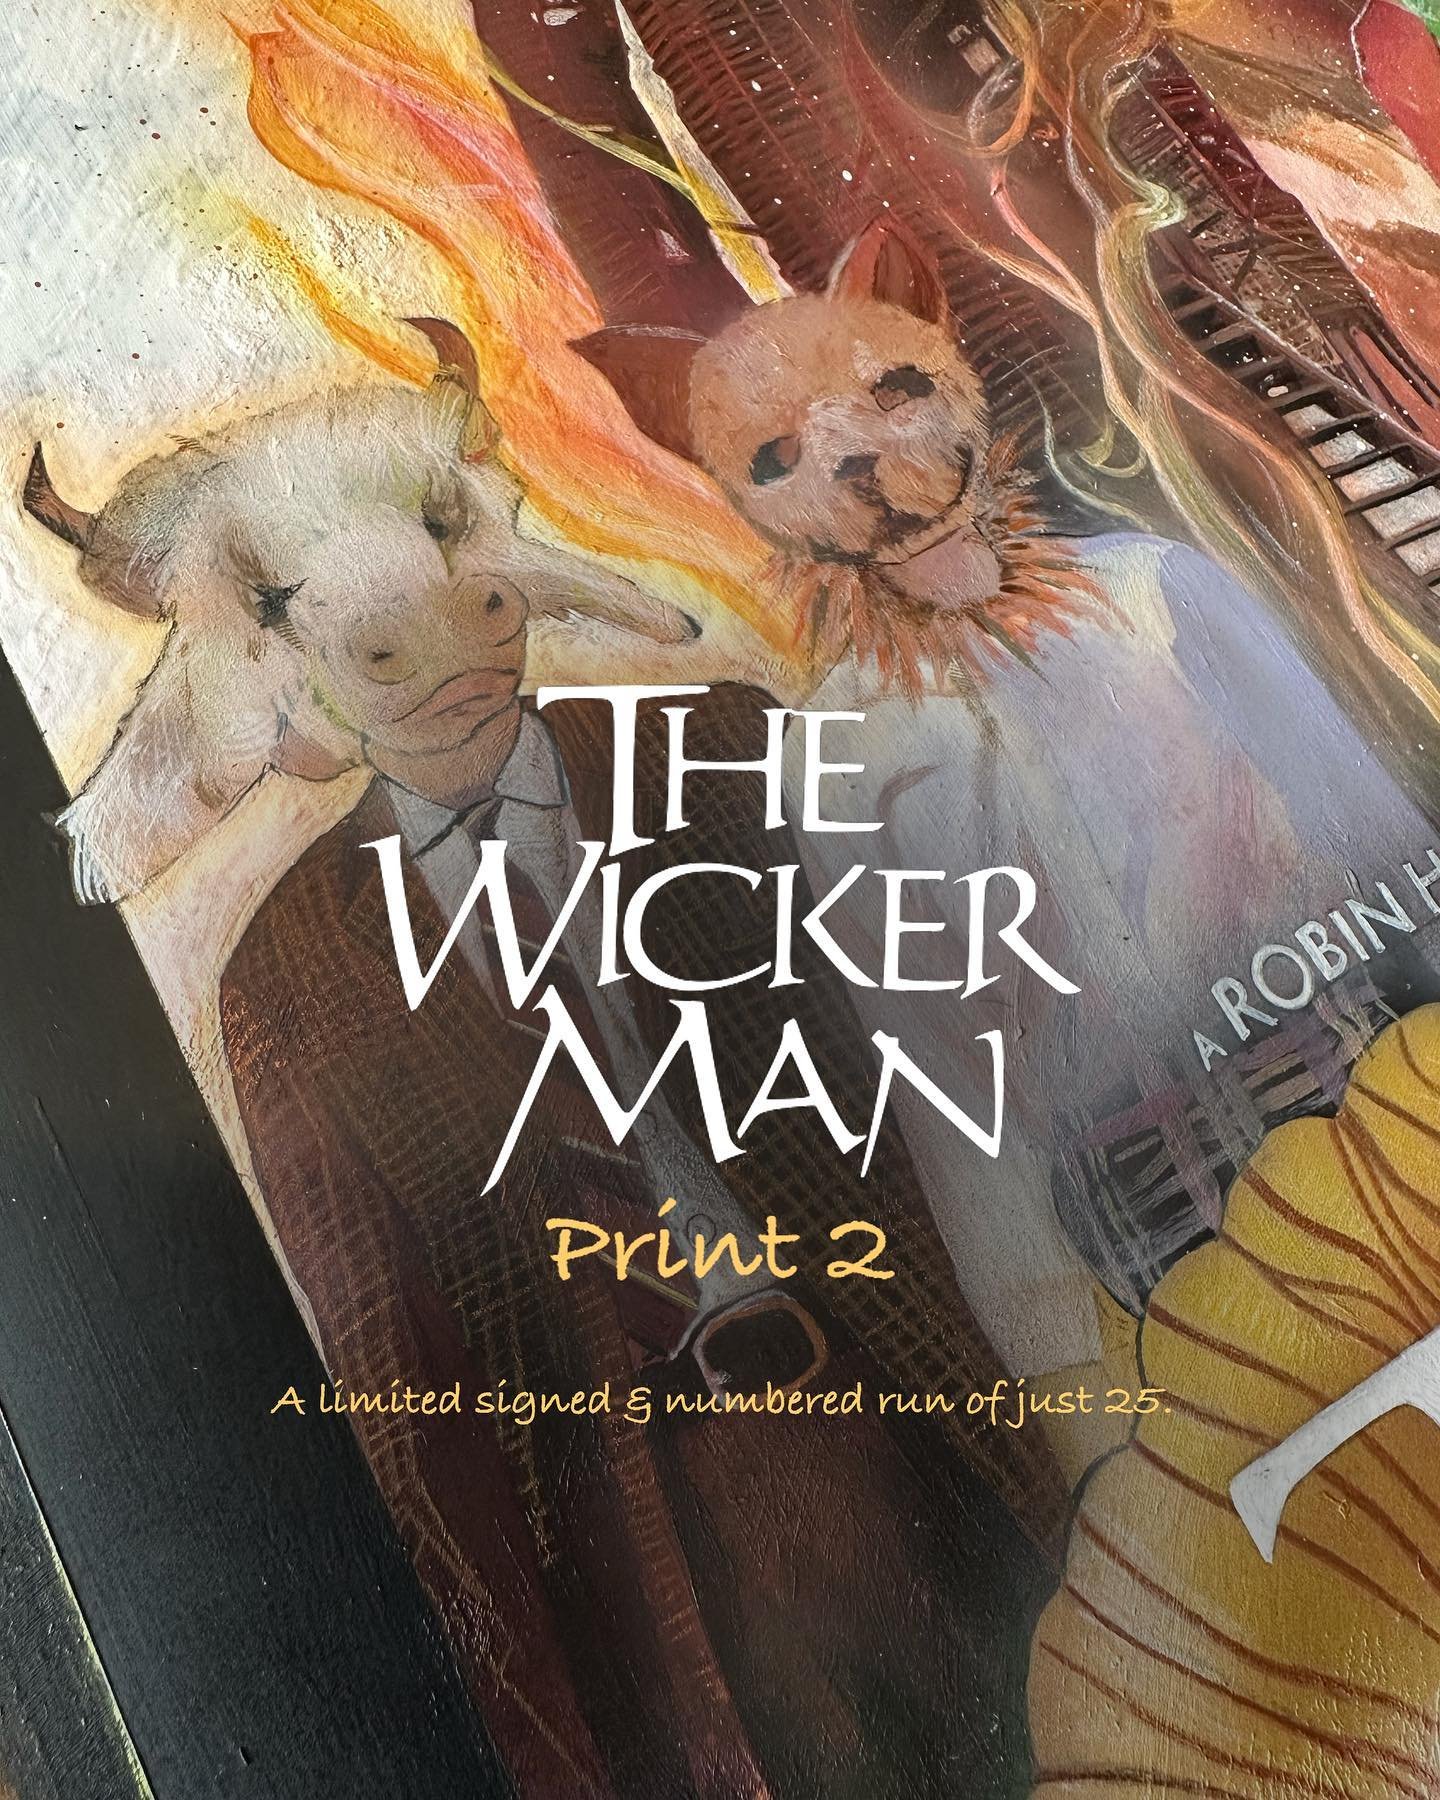 Available to pre-order from 12pm (UK time) tomorrow, 18th May. 

A limited signed and numbered run of 25. 

Website link in bio, worldwide shipping. 

#thewickerman #horrorartist #horrorartwork #culthorror #classichorror #70shorror #folkhorror #alter